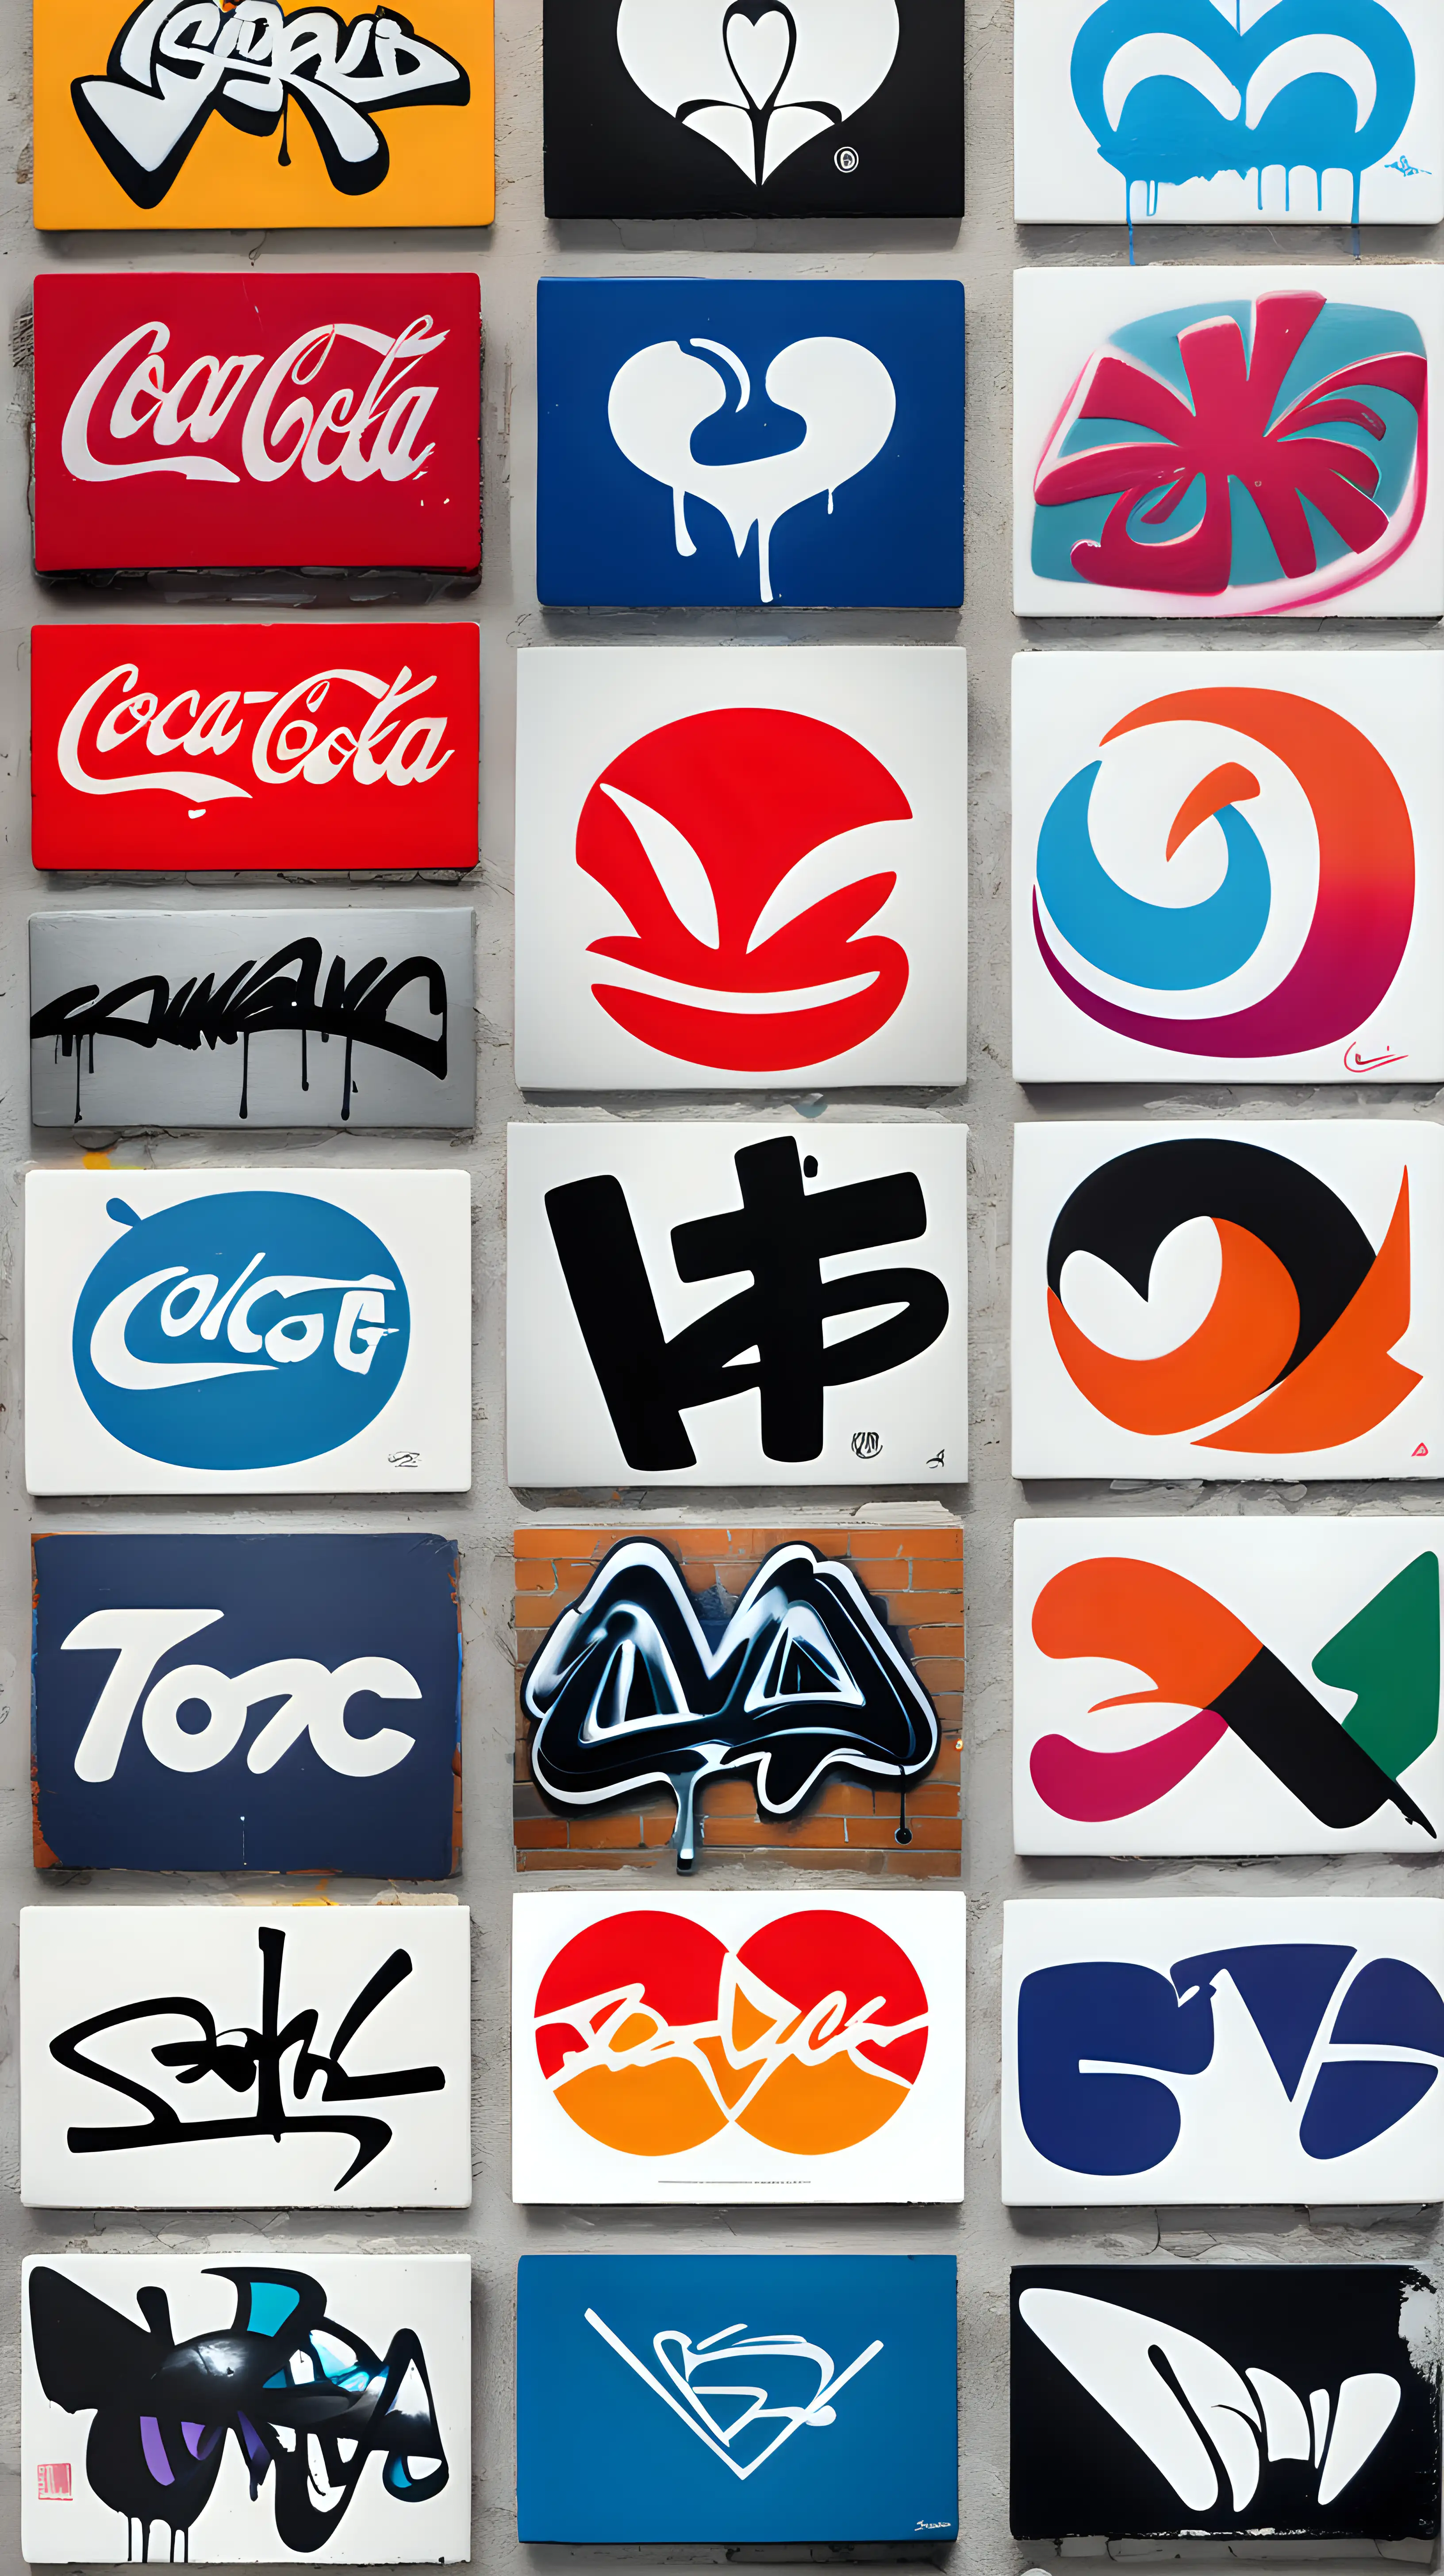 Iconic Logos Transformed into Street Art Masterpieces